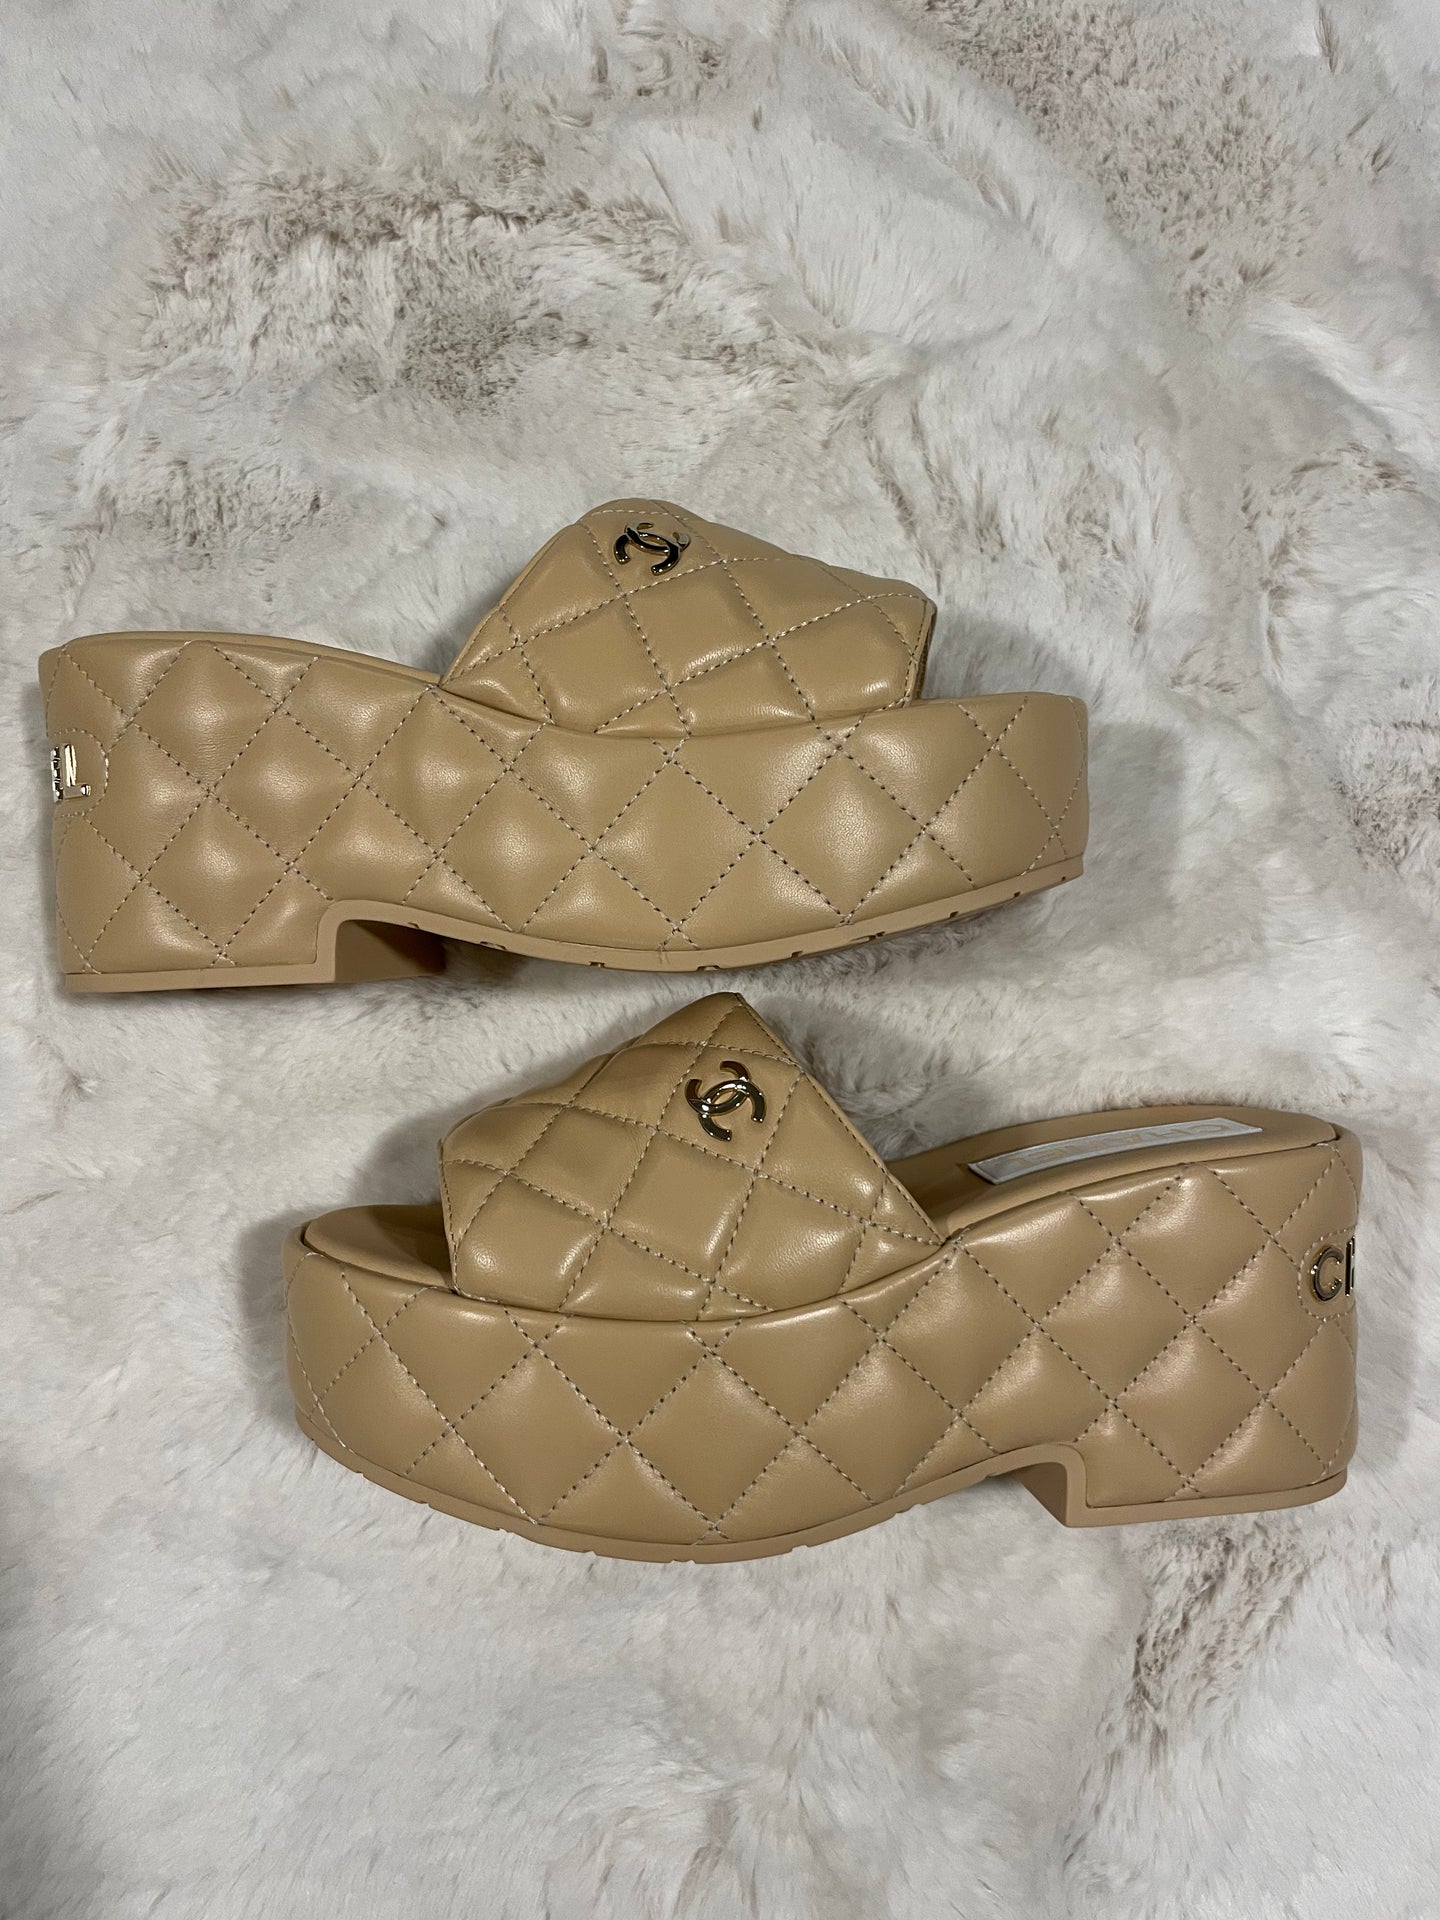 Chanel Beige Quilted Leather Mule Sandals